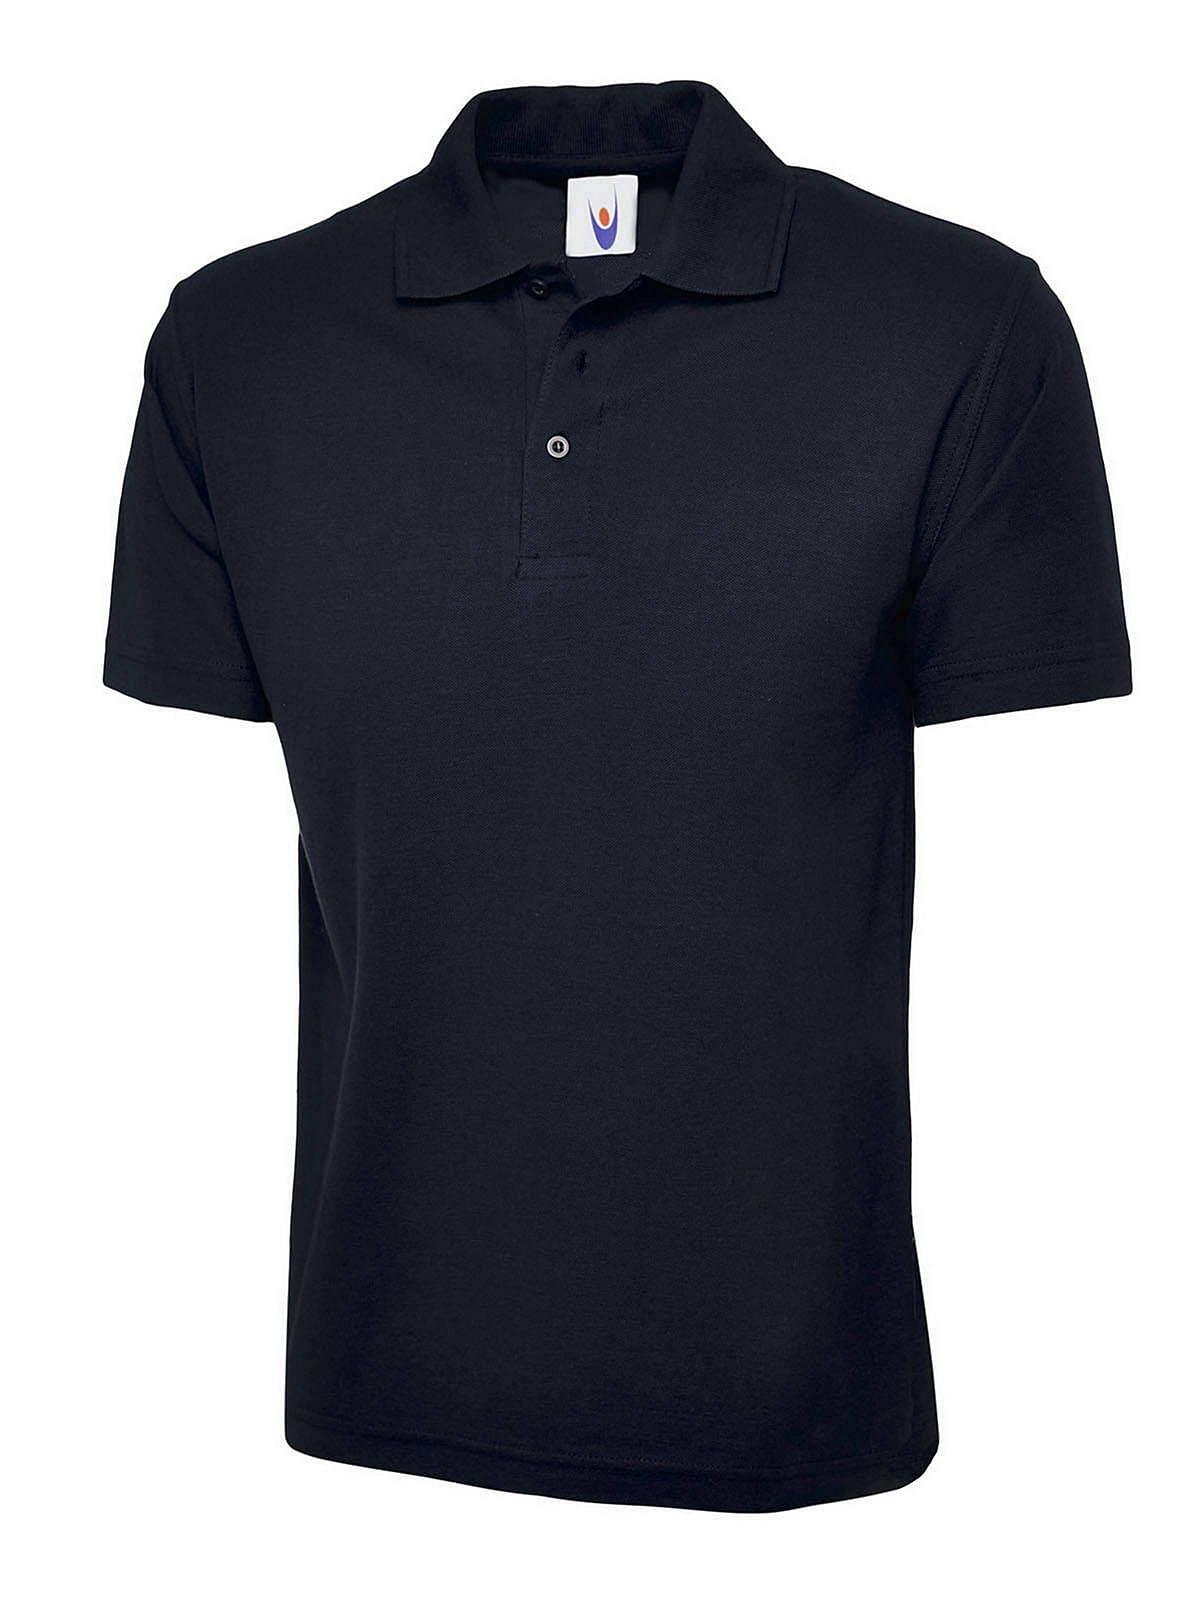 Uneek 220GSM Classic Polo Shirt in Navy (Product Code: UC101)